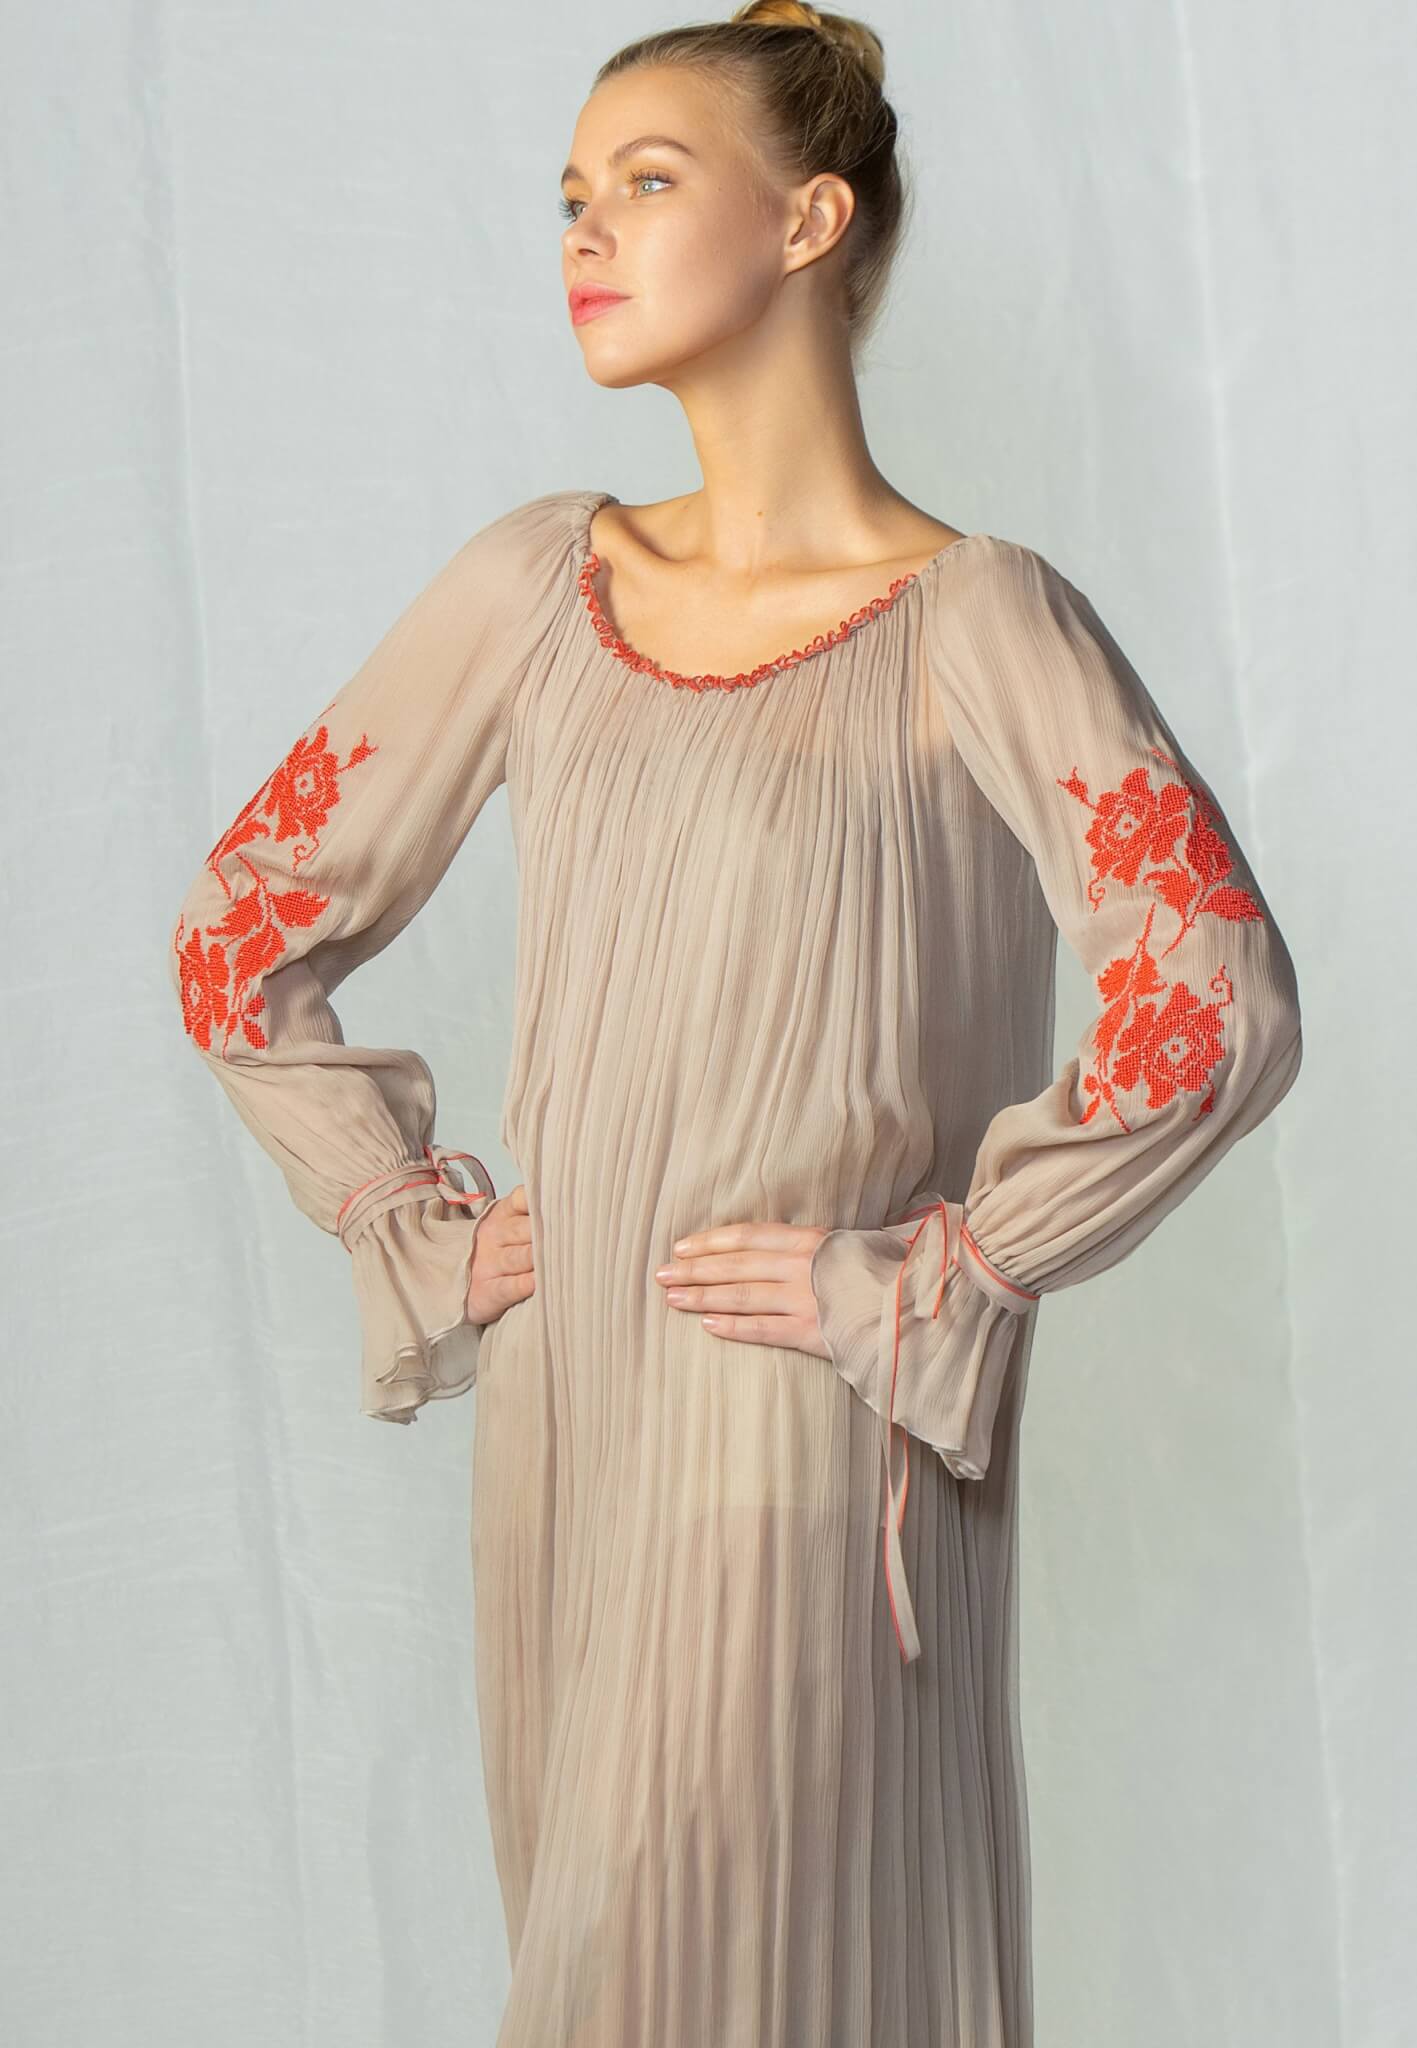 Silk dress with embroidery